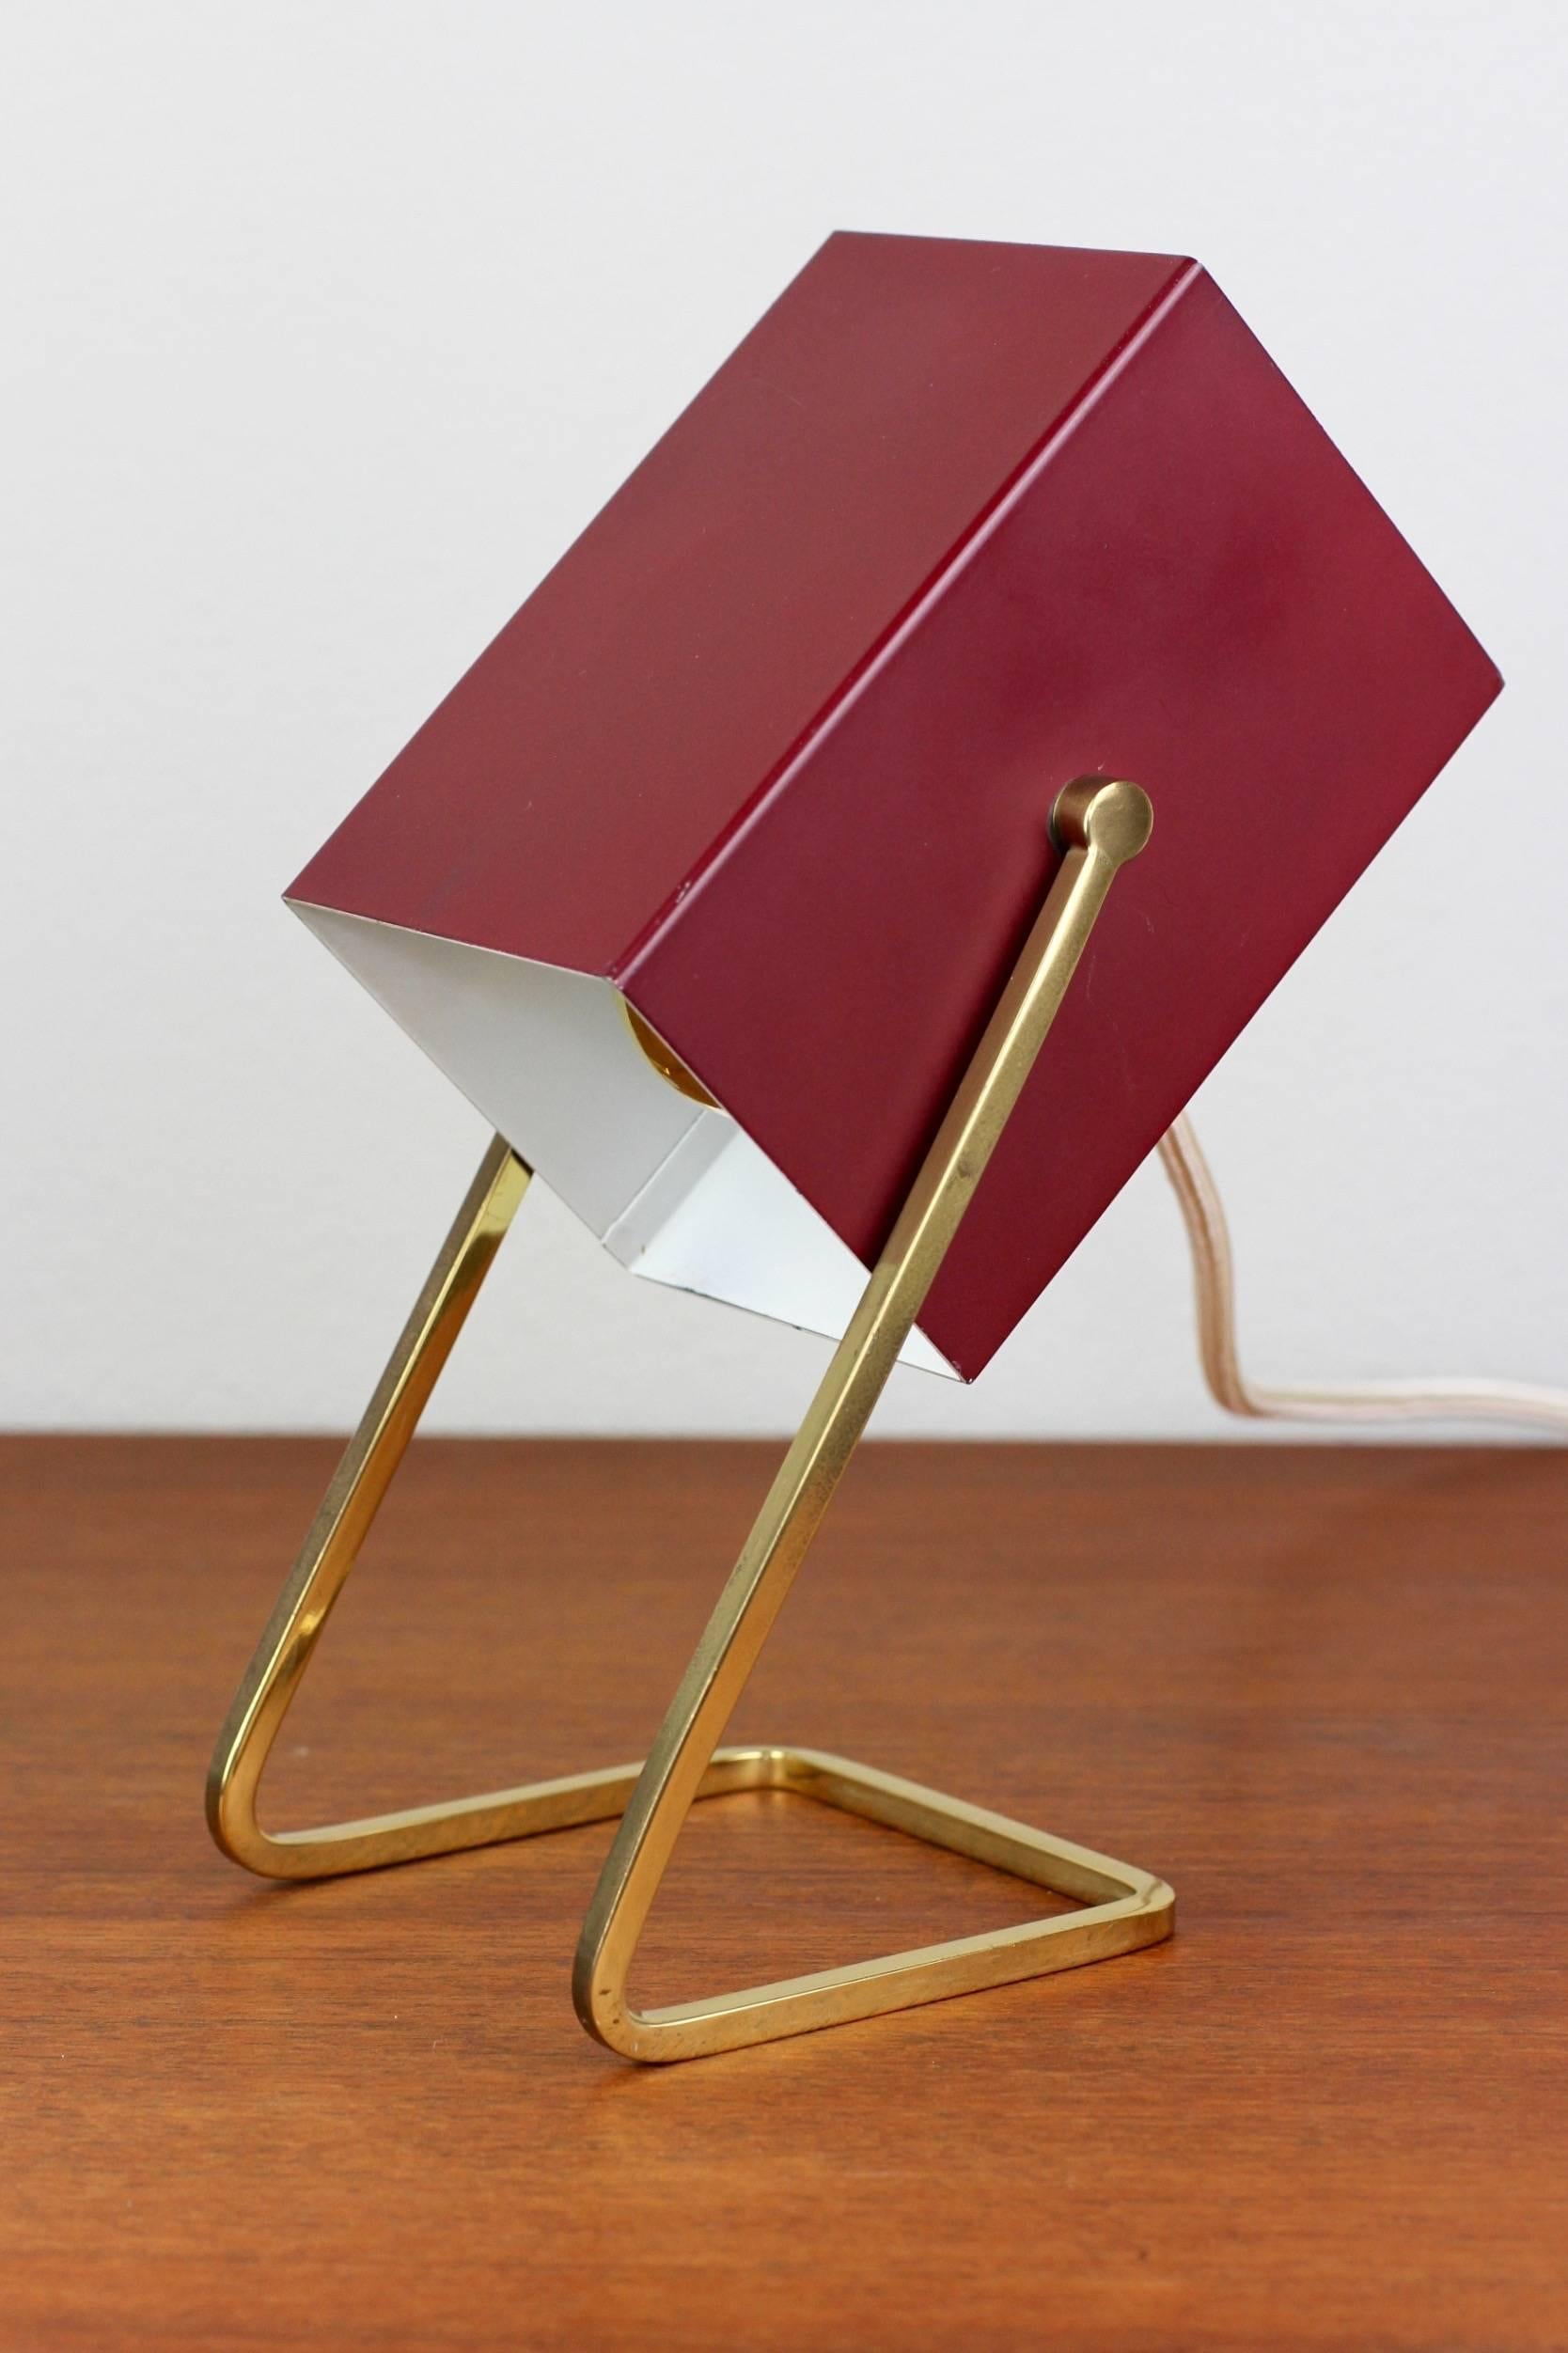 A 1950s German Minimalist cube table lamp/desk light by Kaiser Leuchten. The design speaks for itself - simple, clean and elegantly Cubist. With it's ruby red adjustable metal shade sitting on it's square brass tube base, it's an impressive and